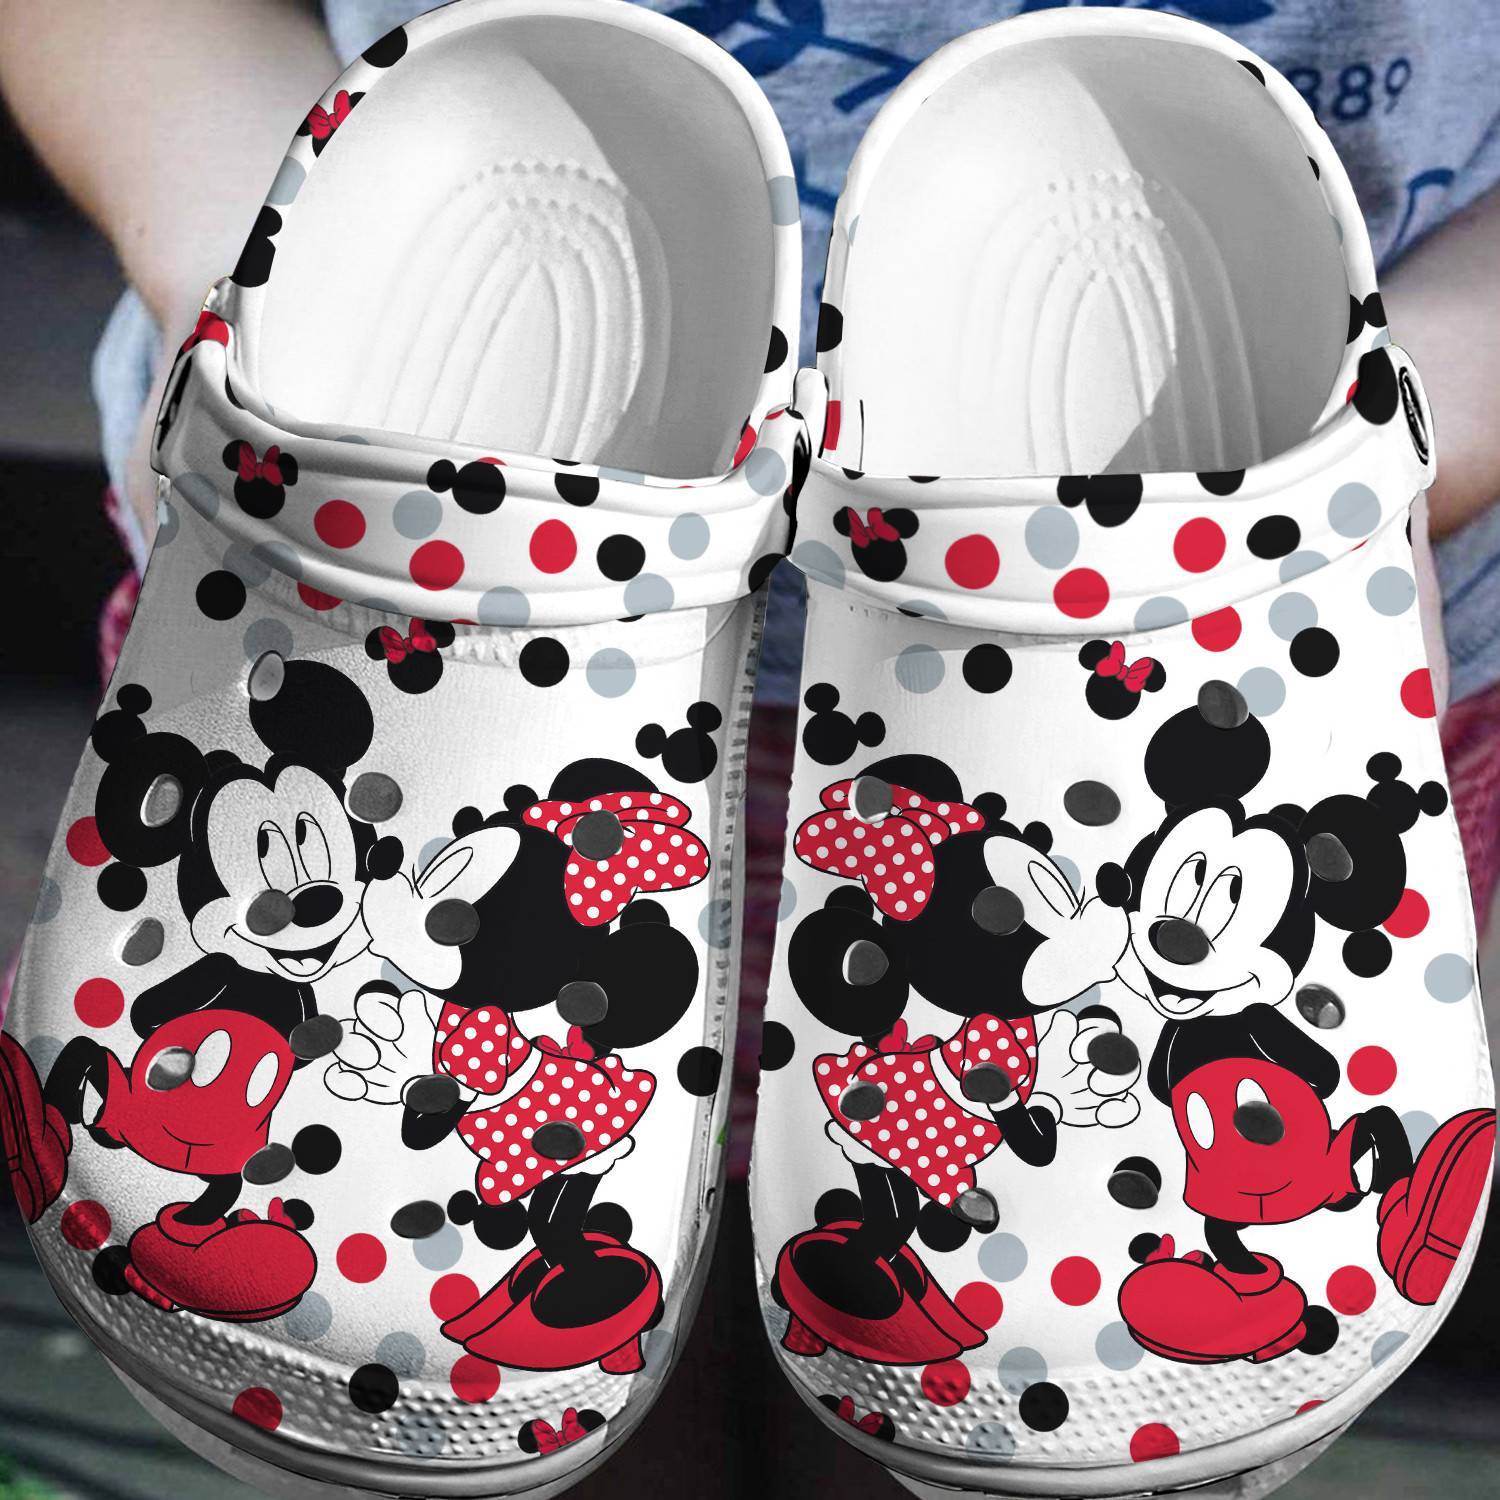 Magical Steps: Mickey Minnie Crocs 3D Clog Shoes – Disney Enchantment for Your Feet